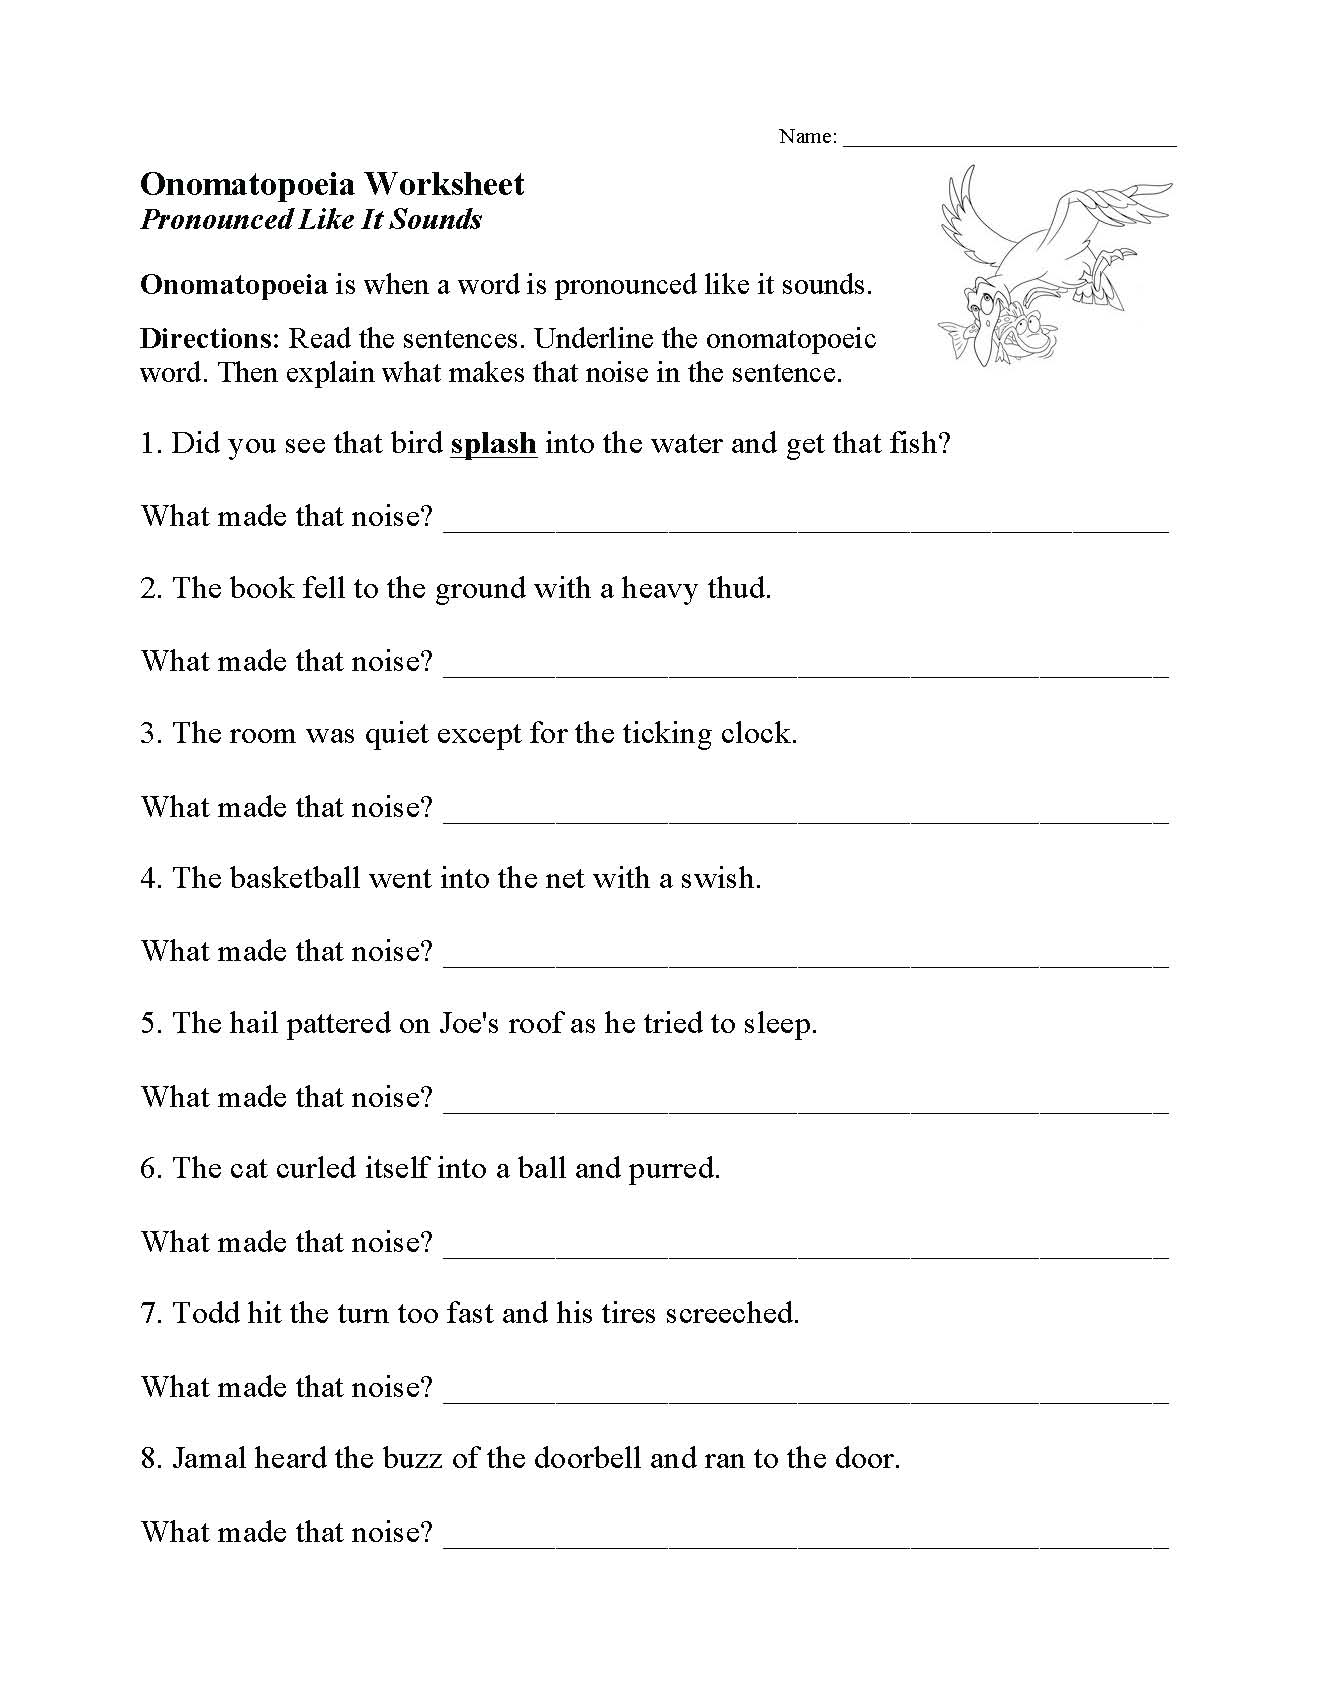 This is a preview image of our Onomatopoeia Worksheet. Click on it to enlarge or view the source file.